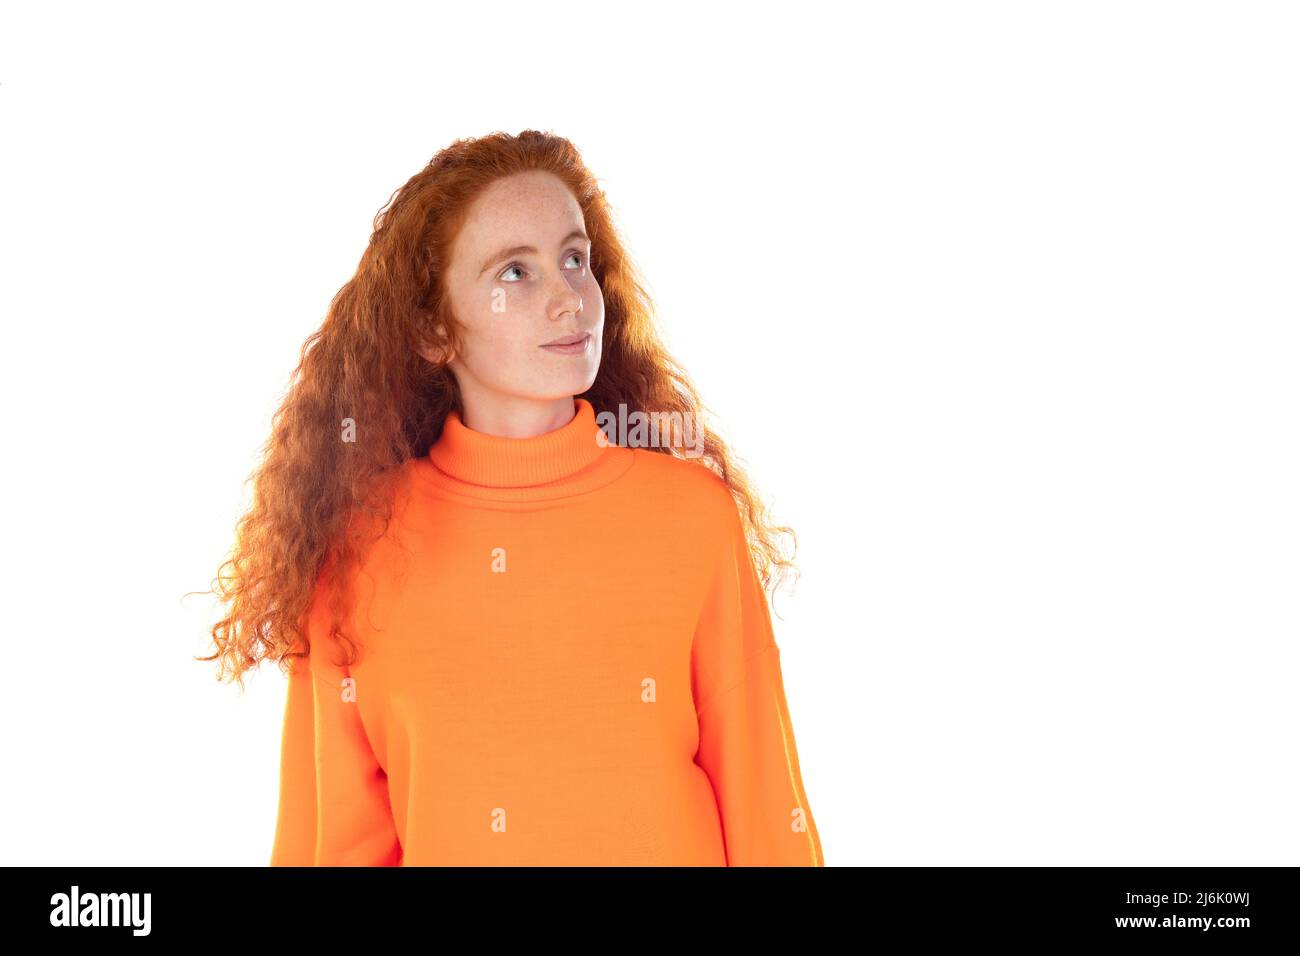 Pensive redhaired girl isolated on a white background Stock Photo